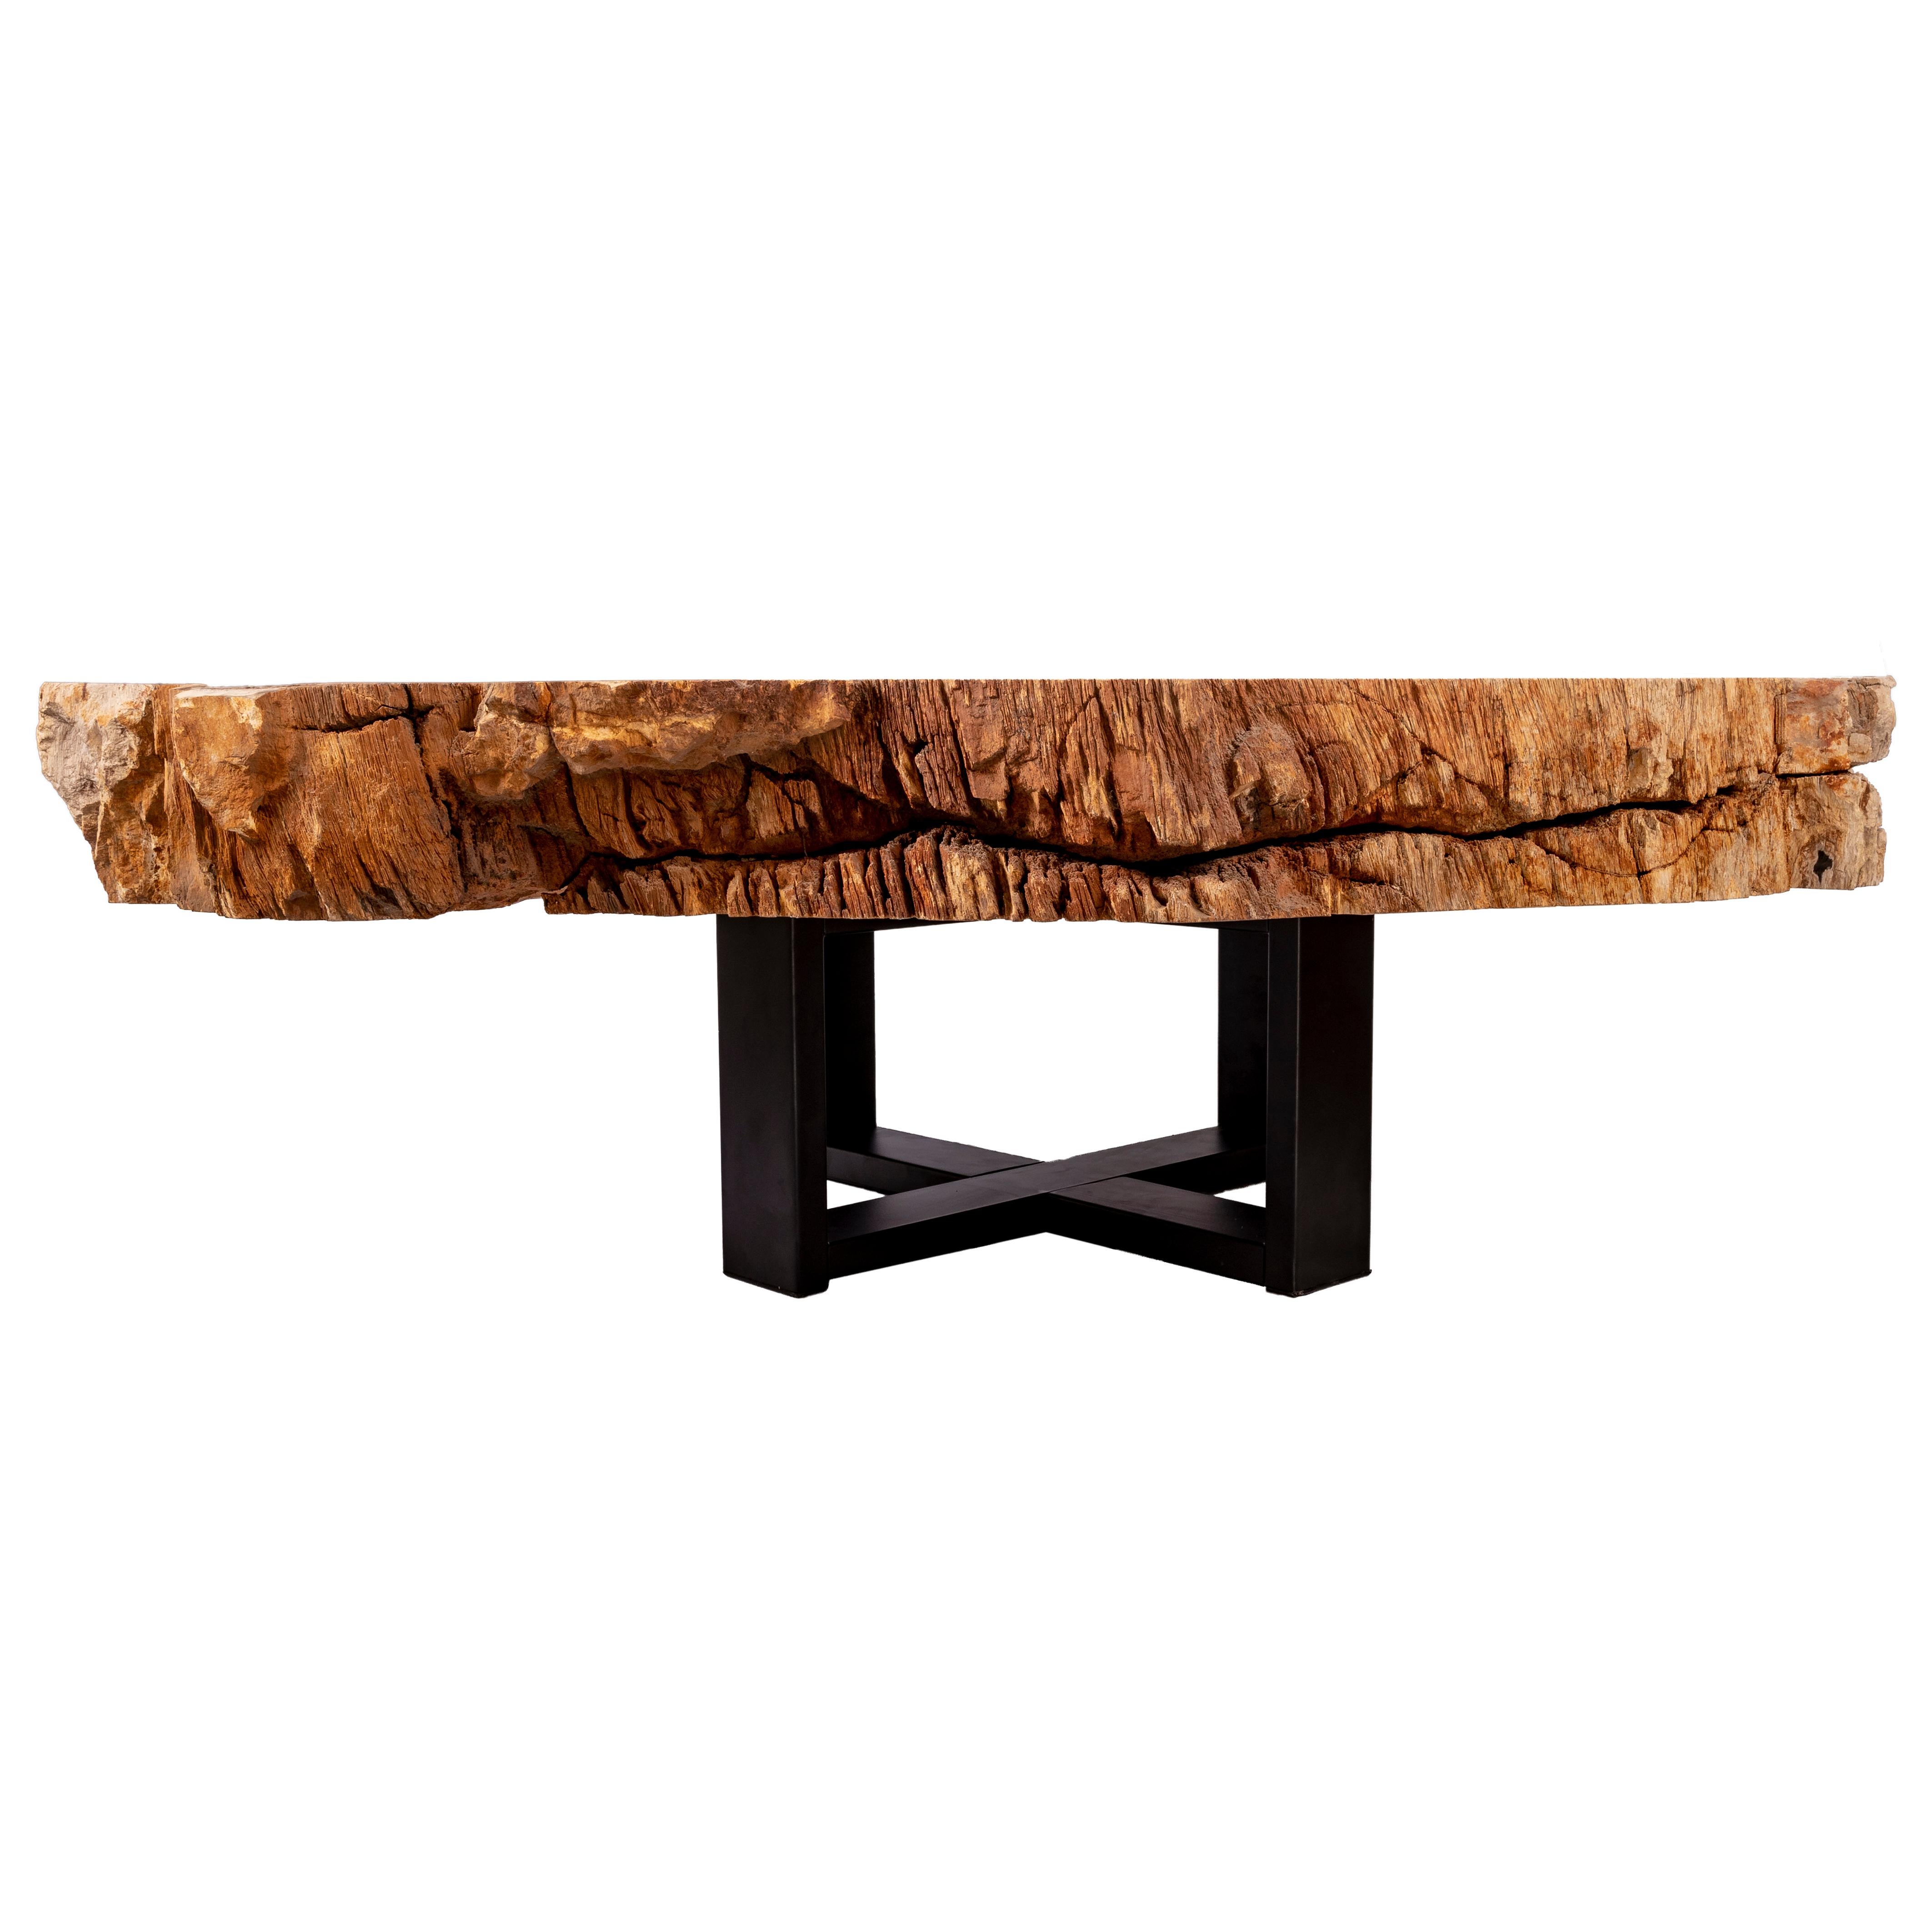 Center of Coffee Table, Natural Circular Shape, Petrified Wood with Metal Base 2